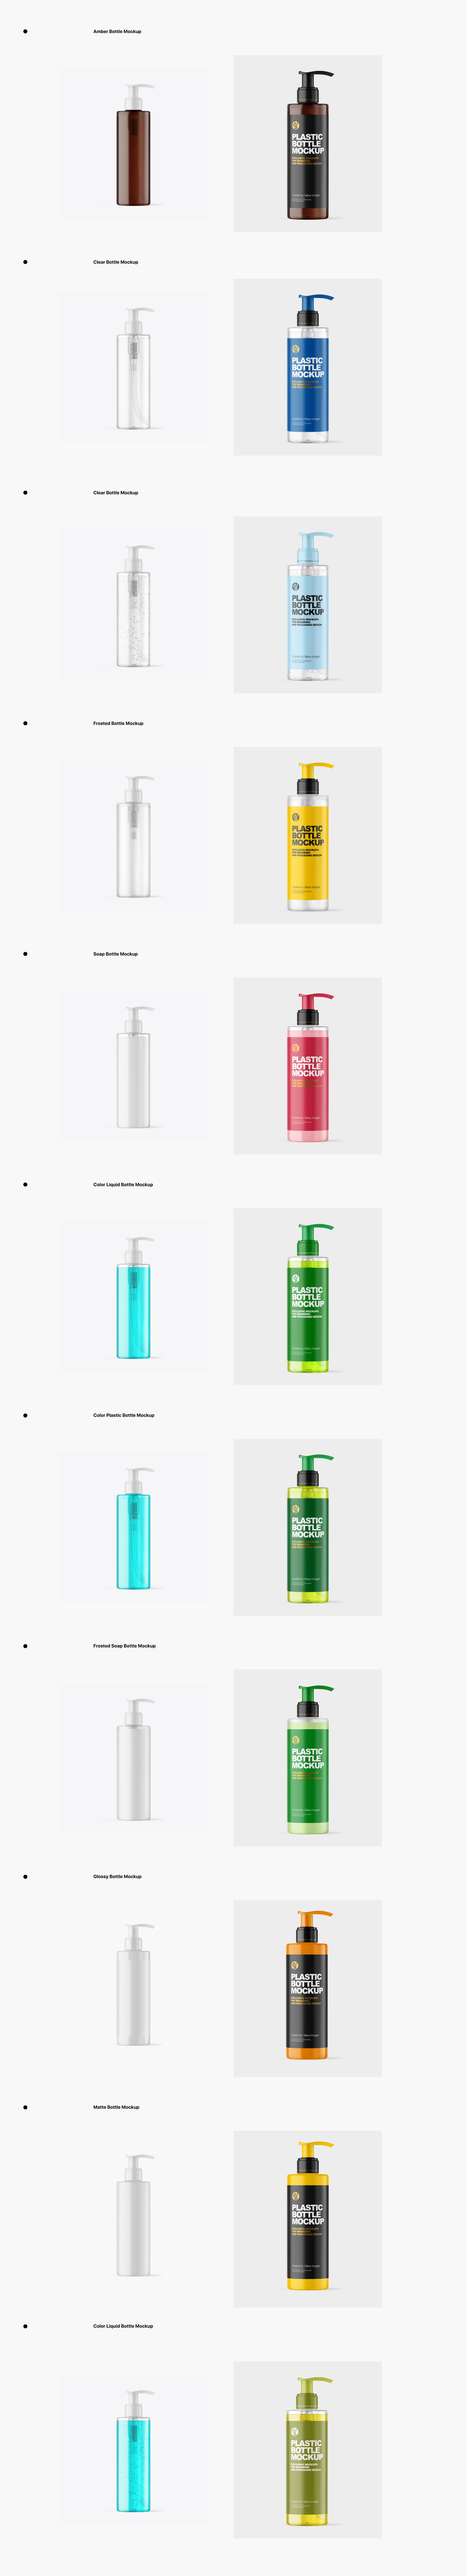 Download 200 Ml Cosmetic Bottles With Pump Mockups Psd On Behance Yellowimages Mockups